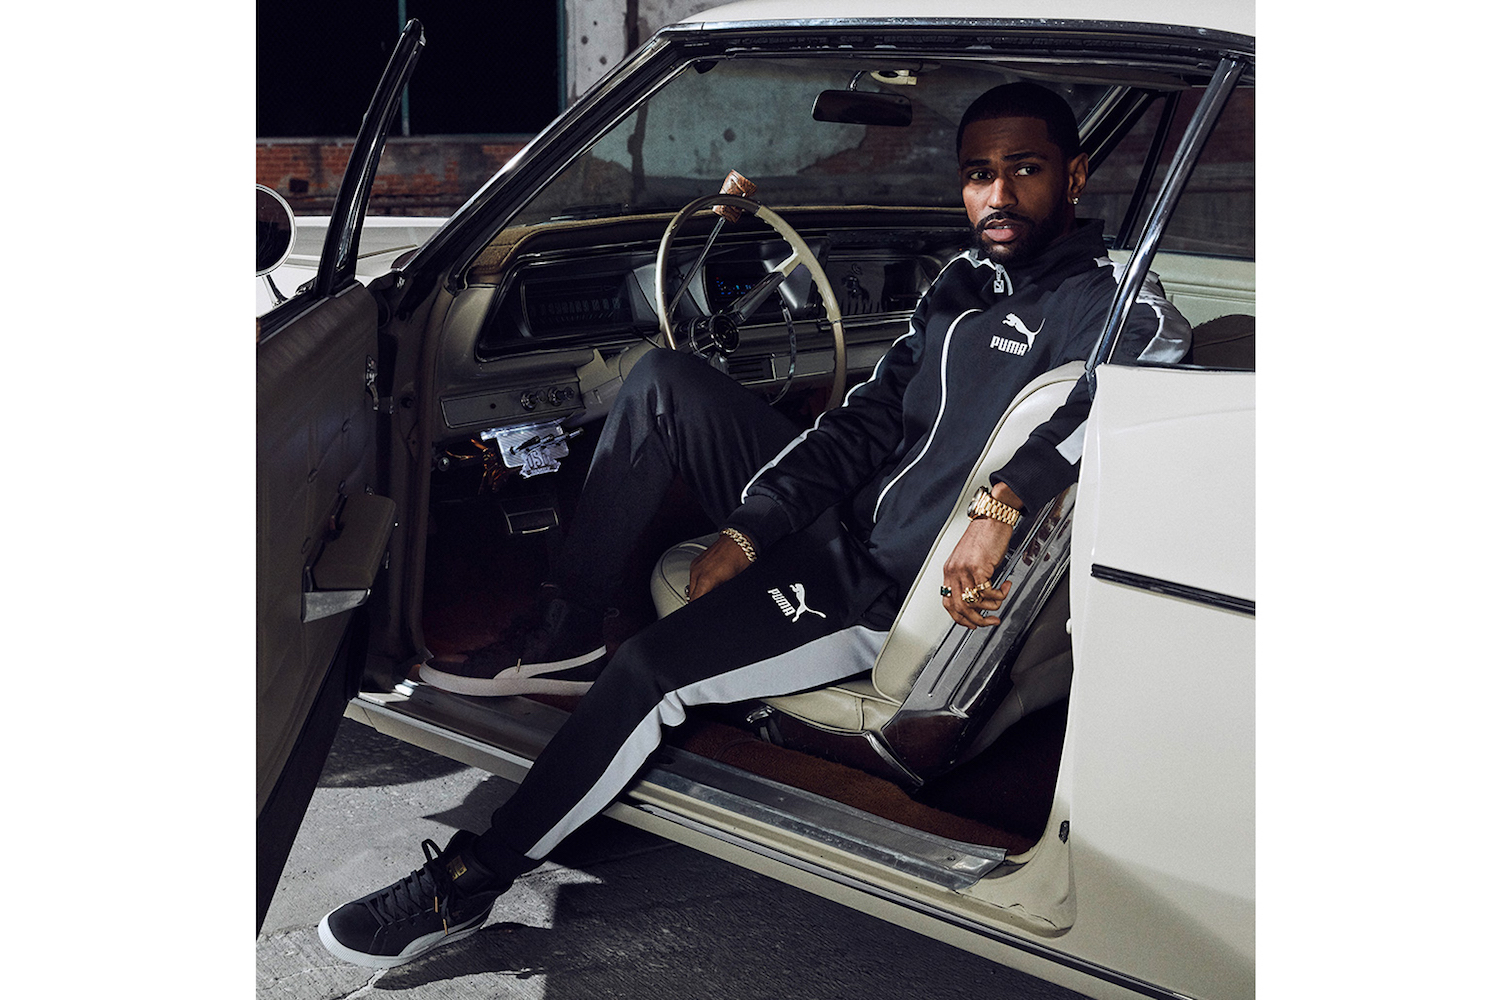 PUMA Release Clyde Mid ‘Foil’ Campaign With Big Sean